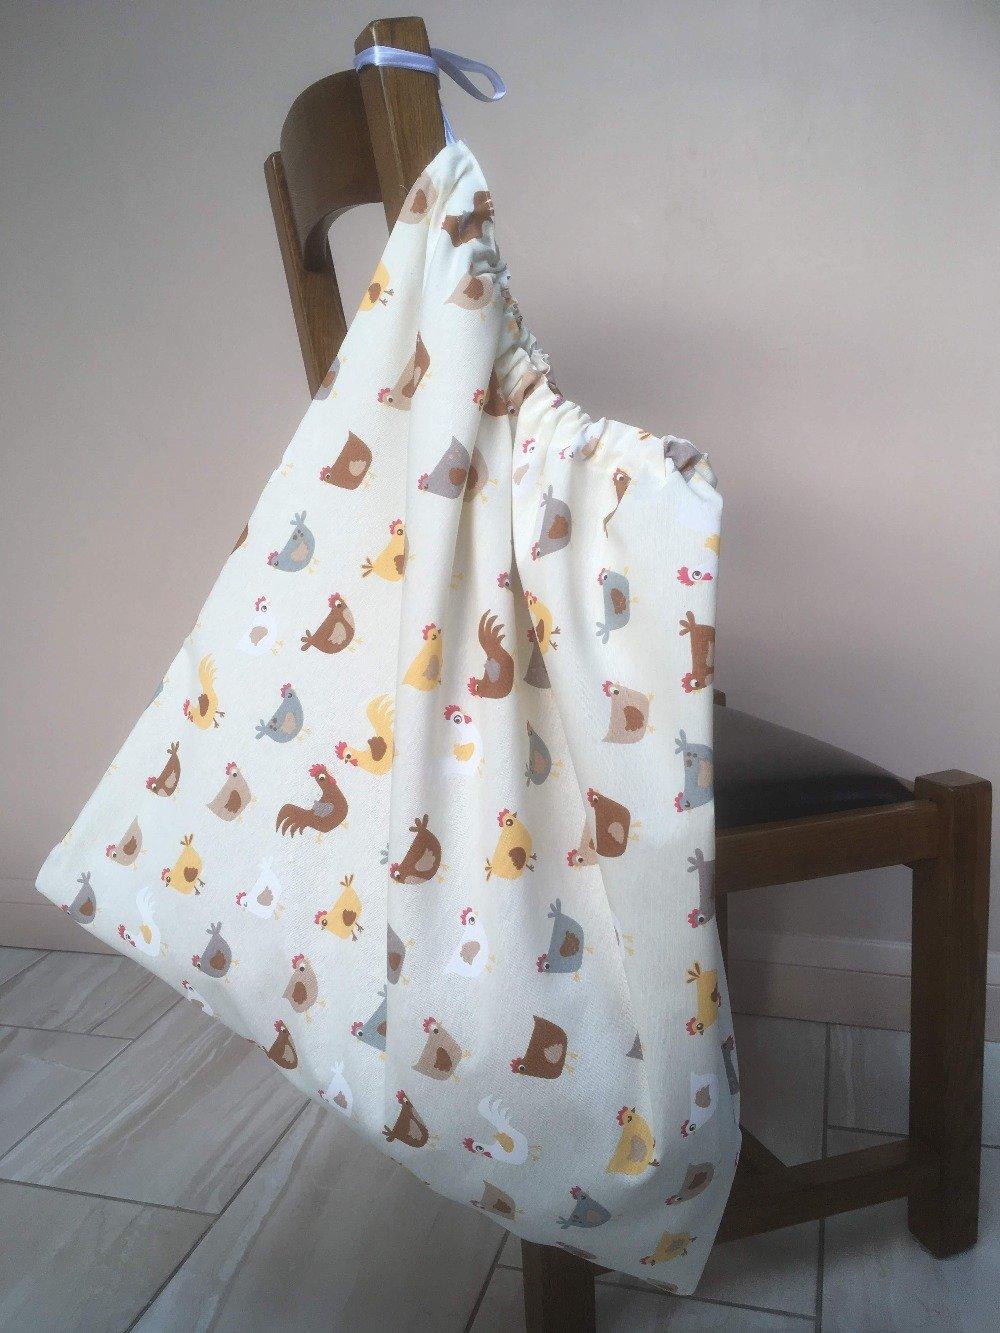 Large drawstring washbag for uniforms to avoid infection from Covid etc Chickens design